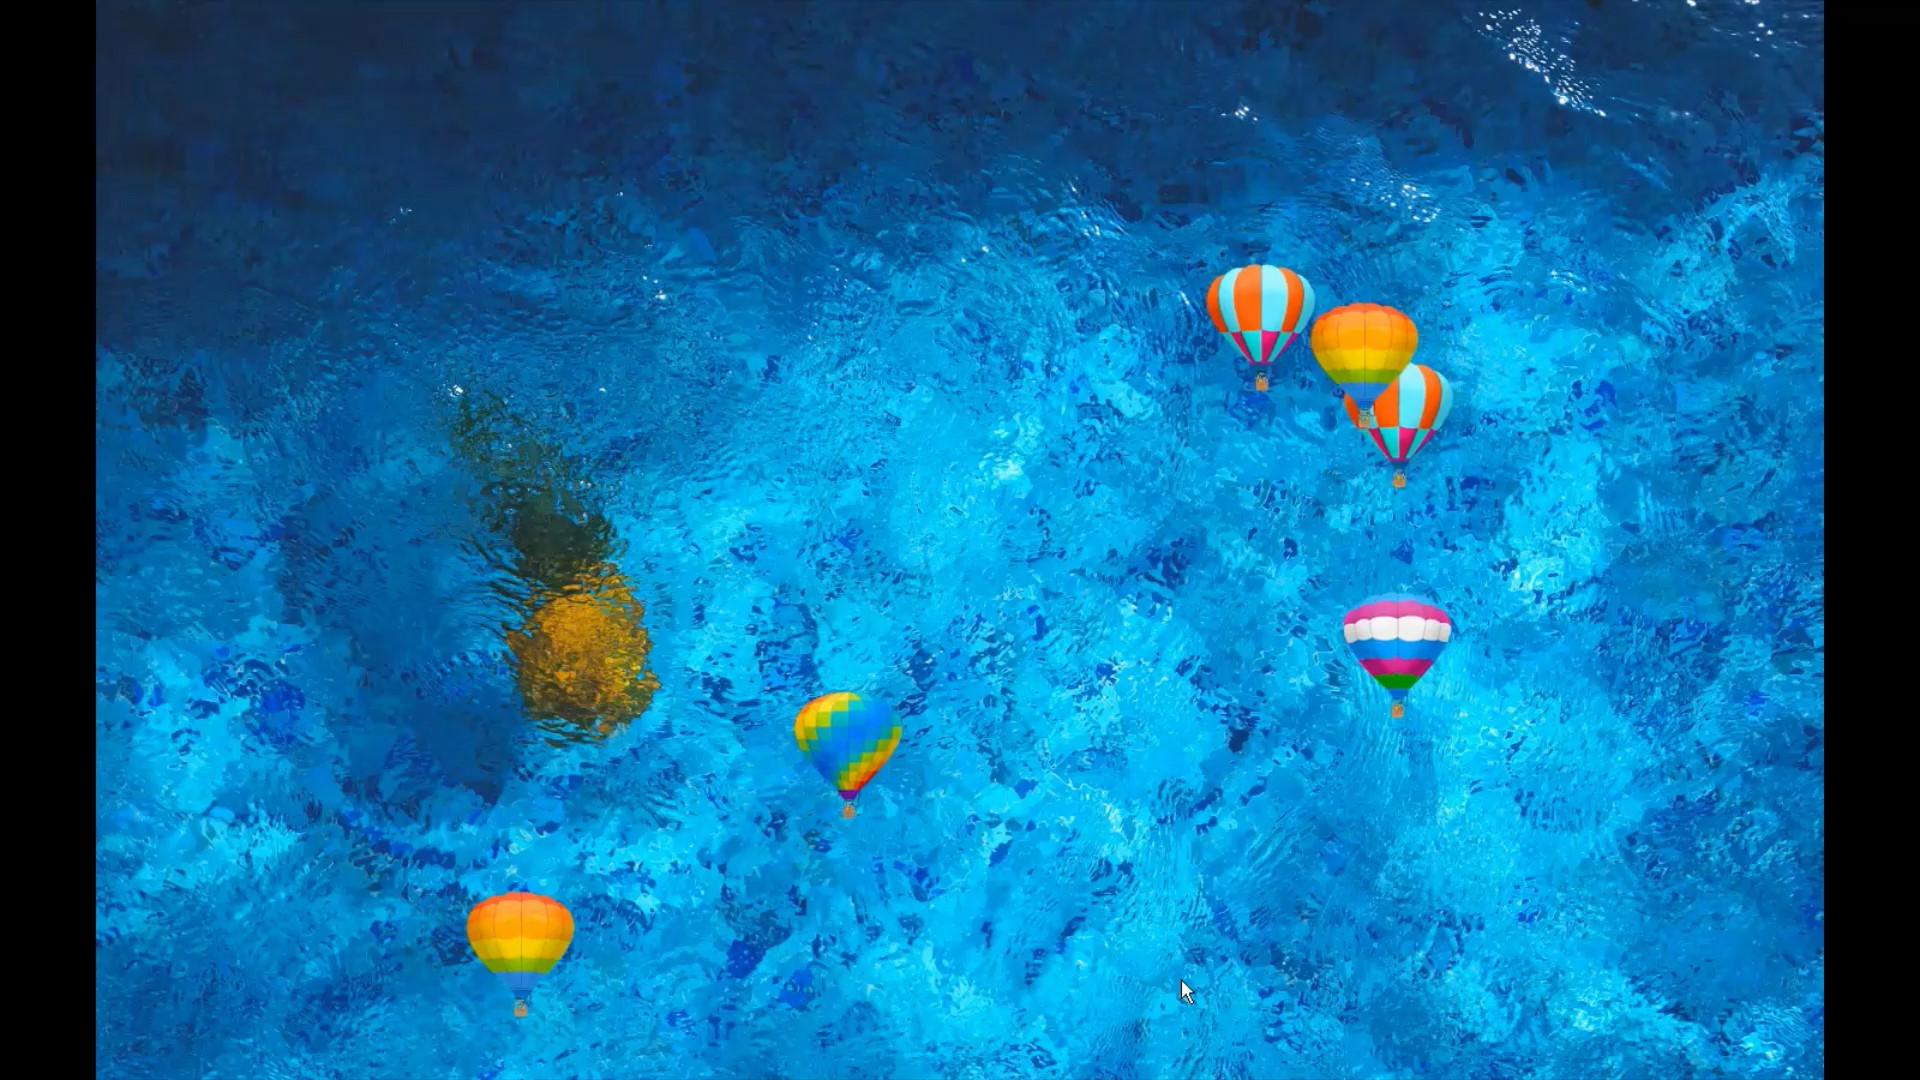 Hot air balloons are floating over the image of the blue swimming pool with a pineapple at the bottom. When the user touches the hot air balloons they will splat.